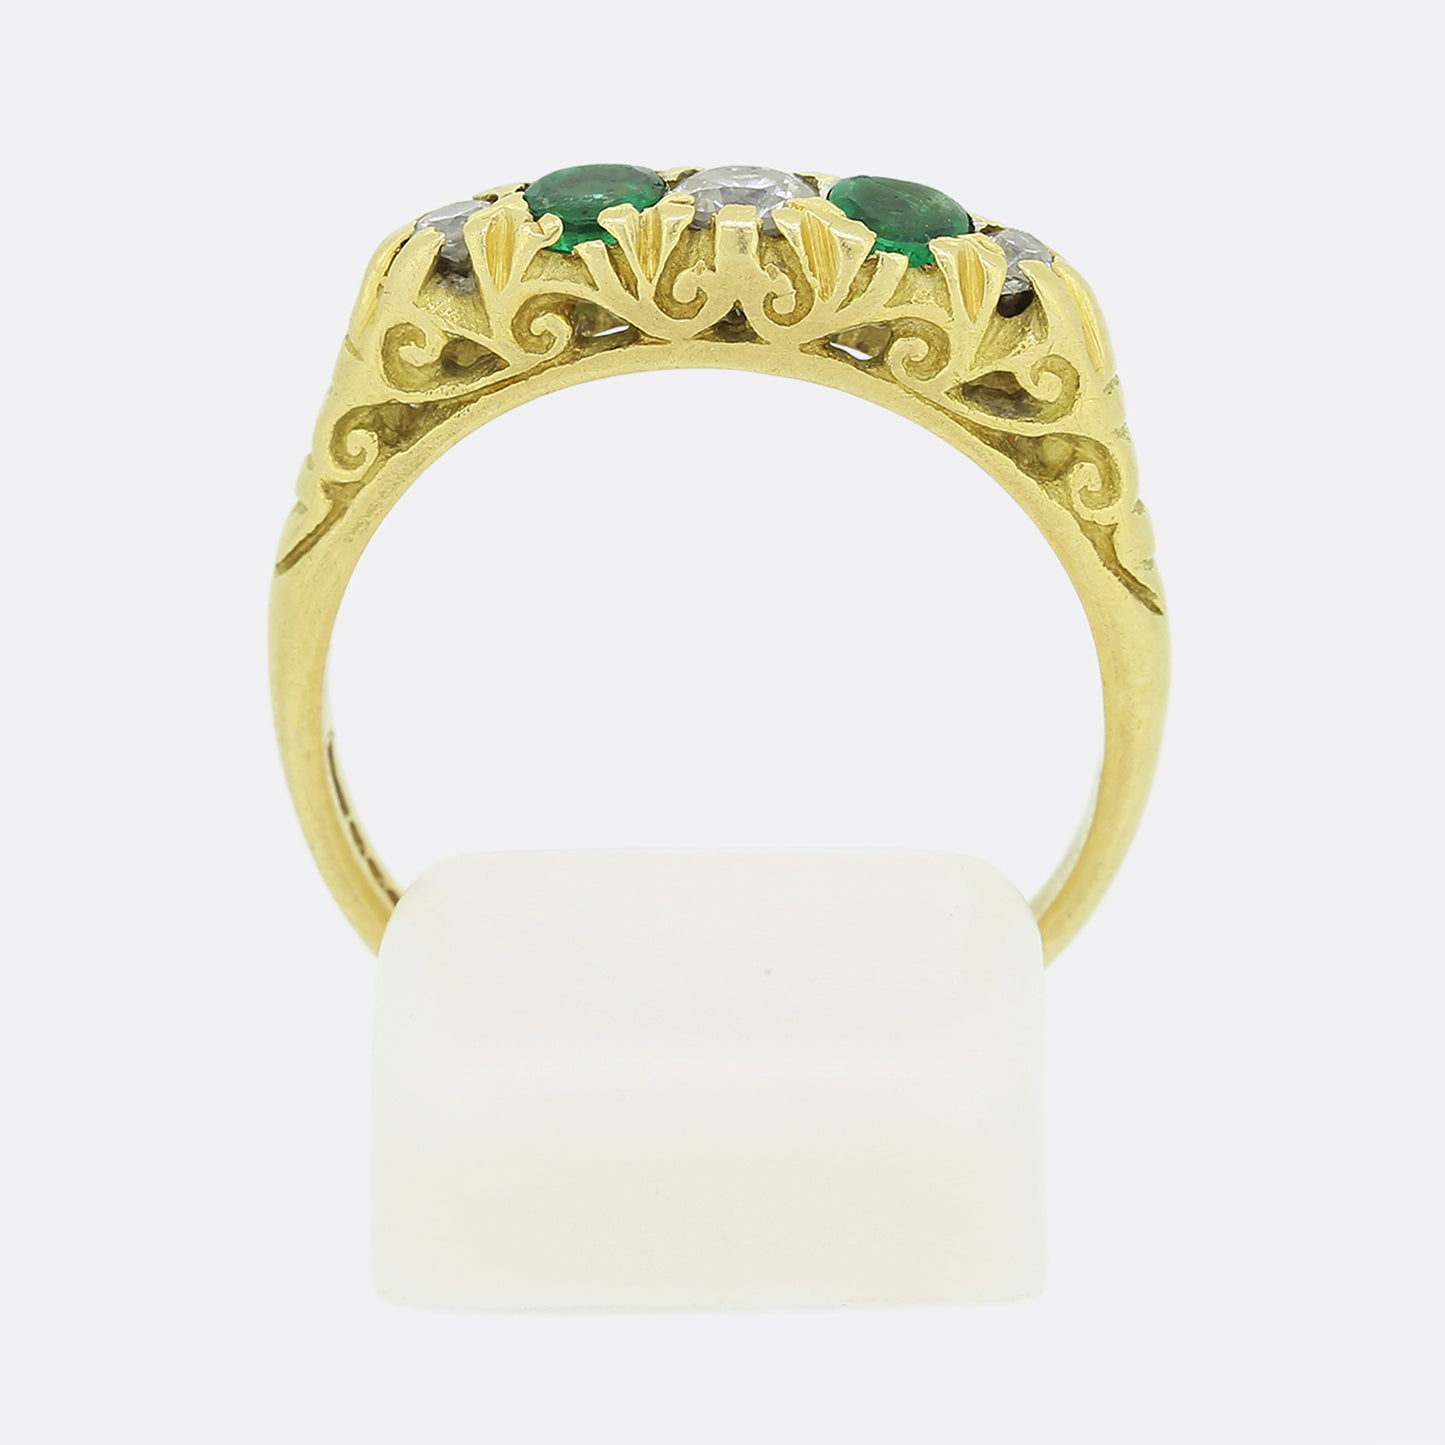 Vintage Emerald and Diamond Five Stone Ring